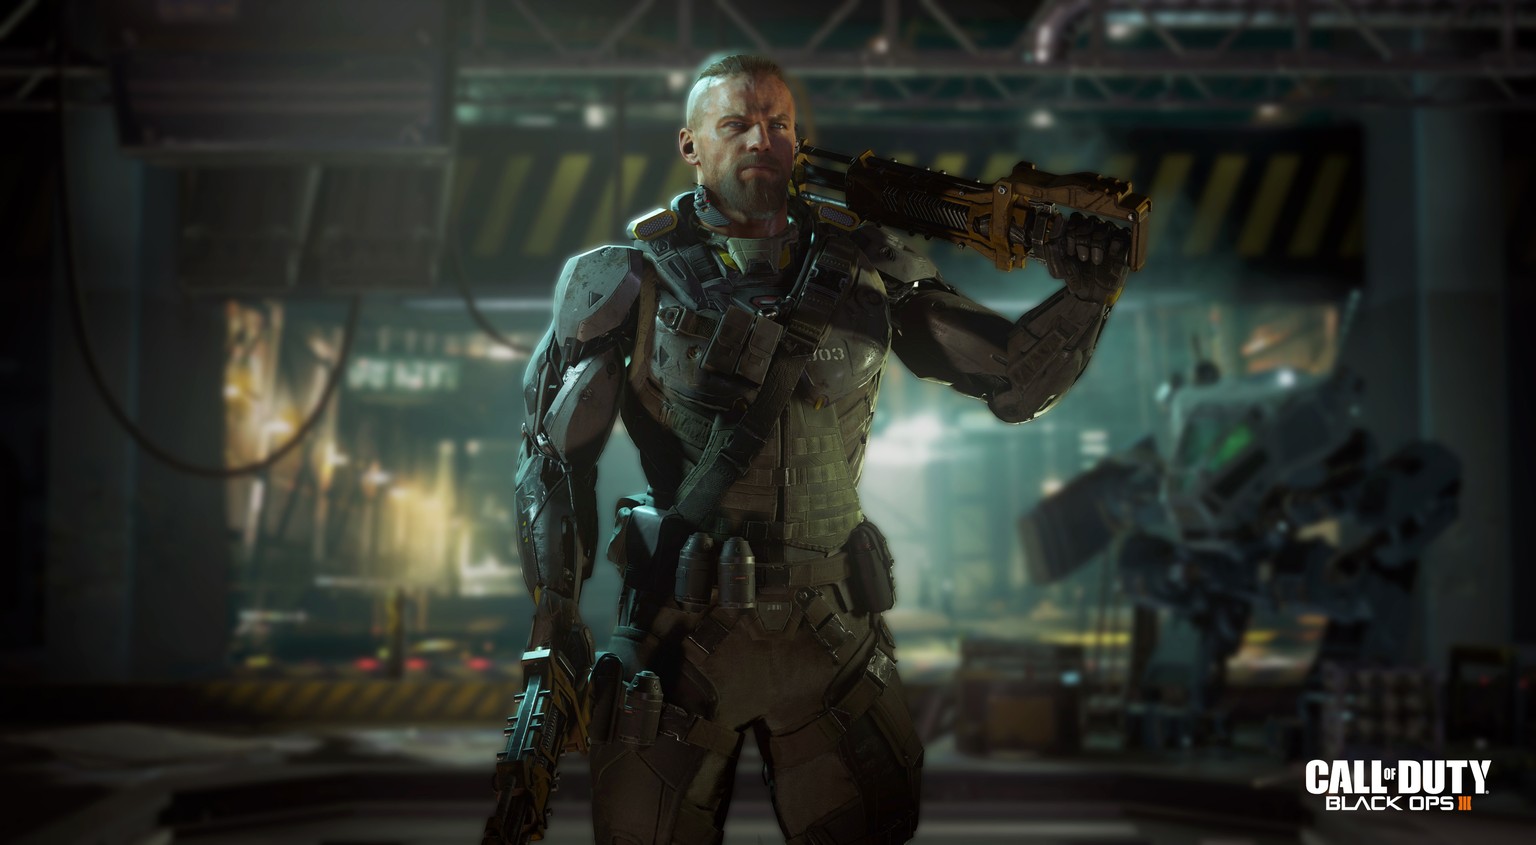 This image released by Activision shows a scene from &quot;Call of Duty: Black Ops 3,&quot; the third installment in Treyarch’s military shooter saga, scheduled for release Nov. 6. (Activision via AP)